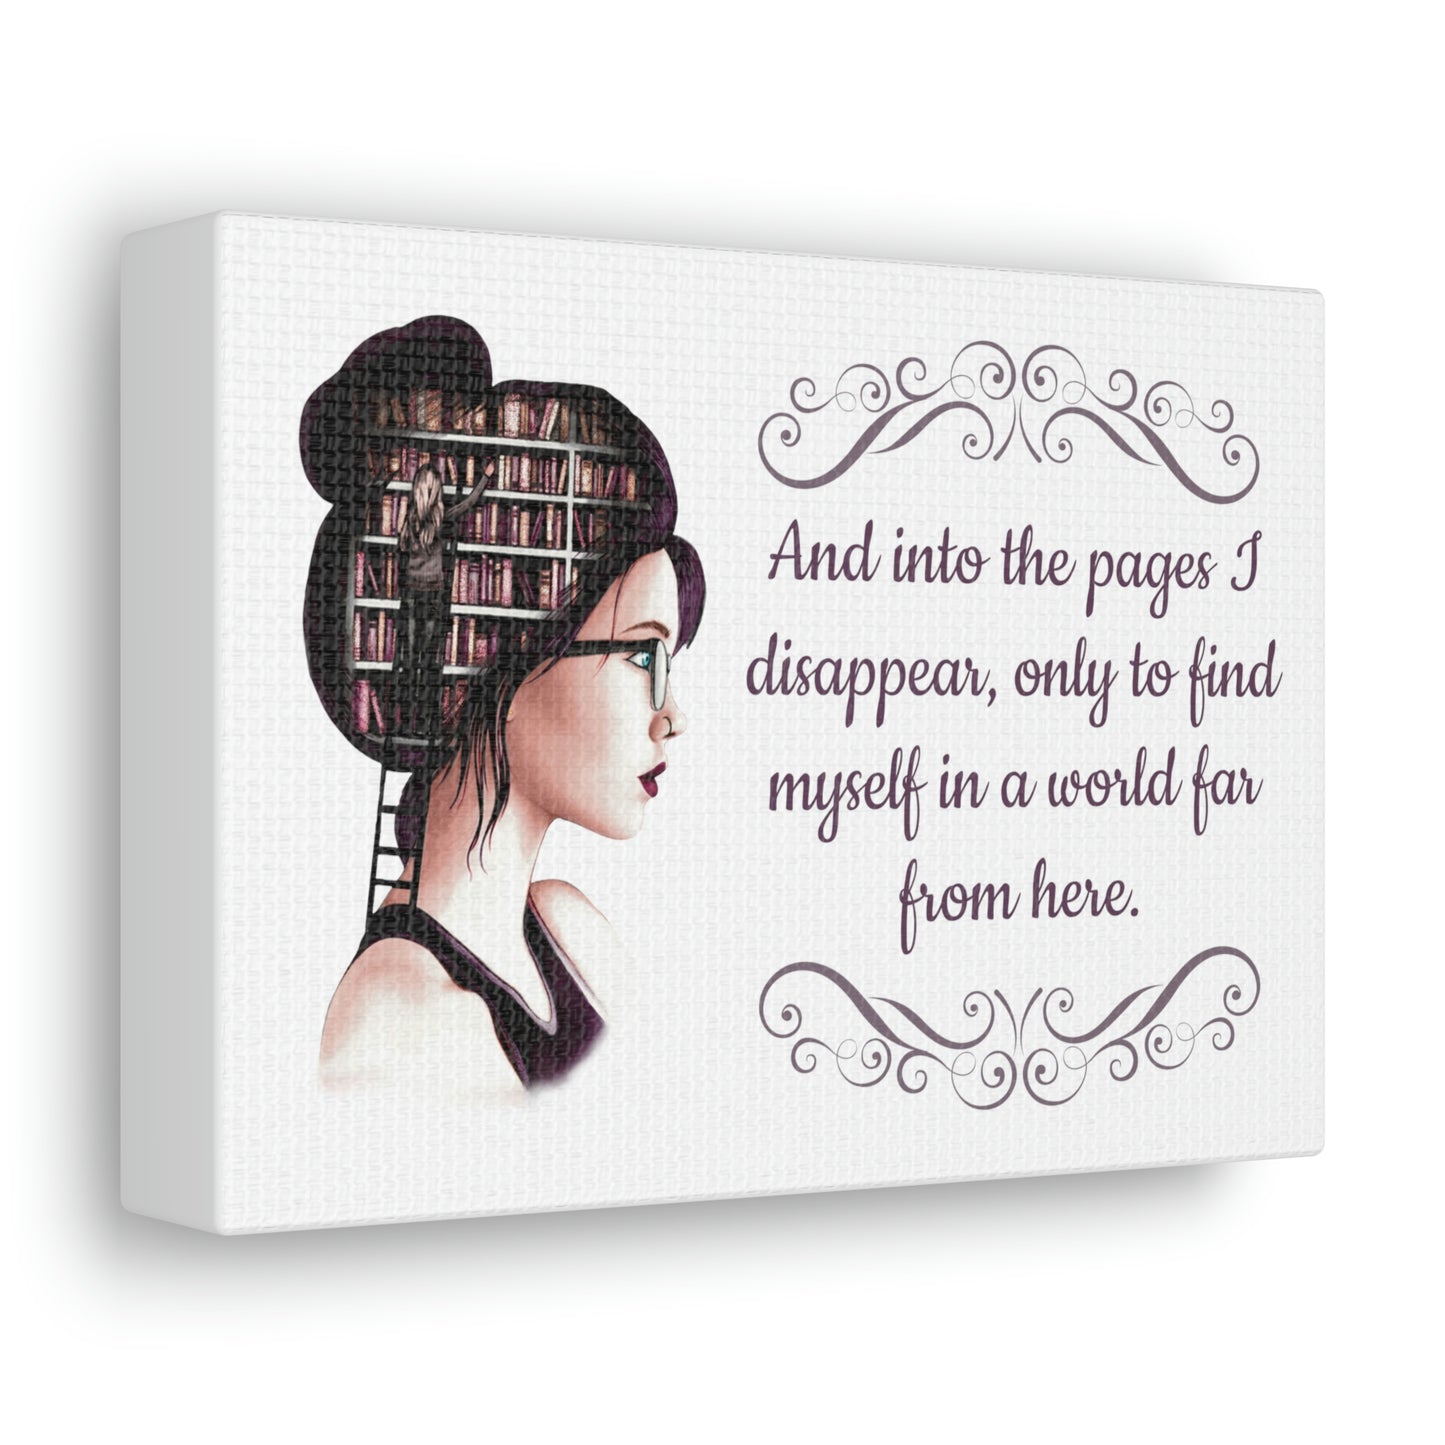 Disappear Into The Pages Canvas Gallery Wraps